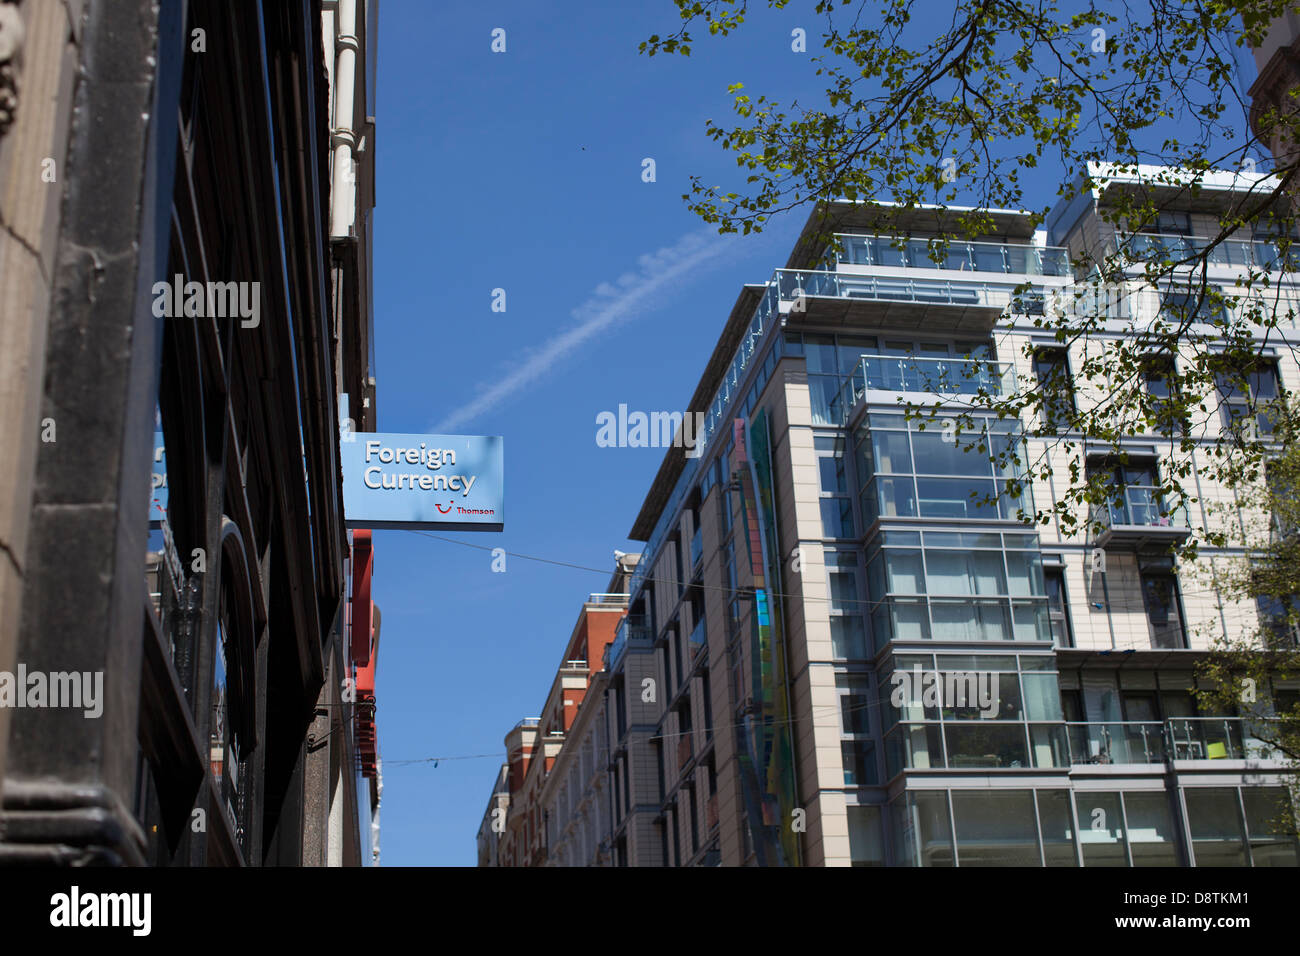 A Thomson foreign currency sign against a blue sky with a holiday jet vapour trail in a city centre in the UK Stock Photo